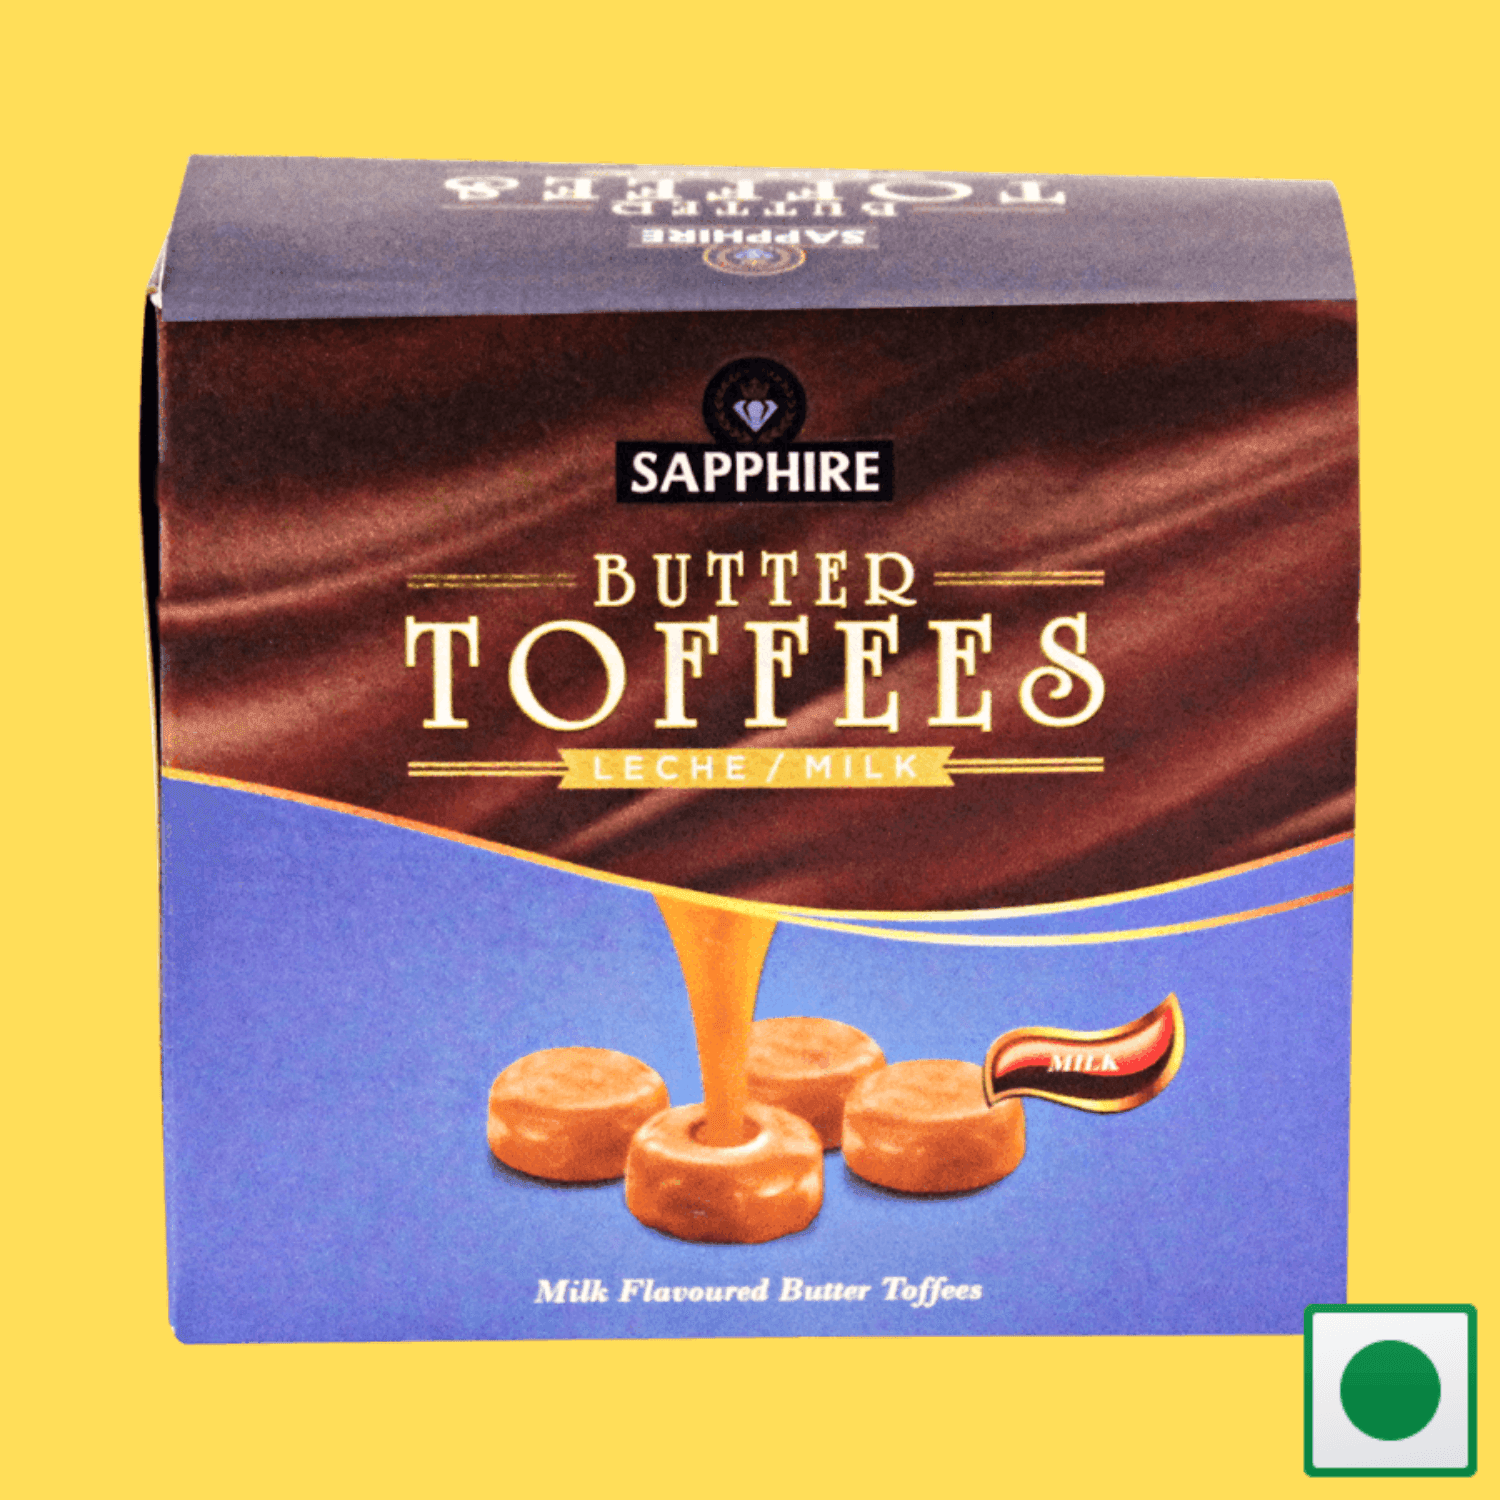 SAPPHIRE BUTTER TOFFEES LECHE/MILK 150G (Imported) - Super 7 Mart